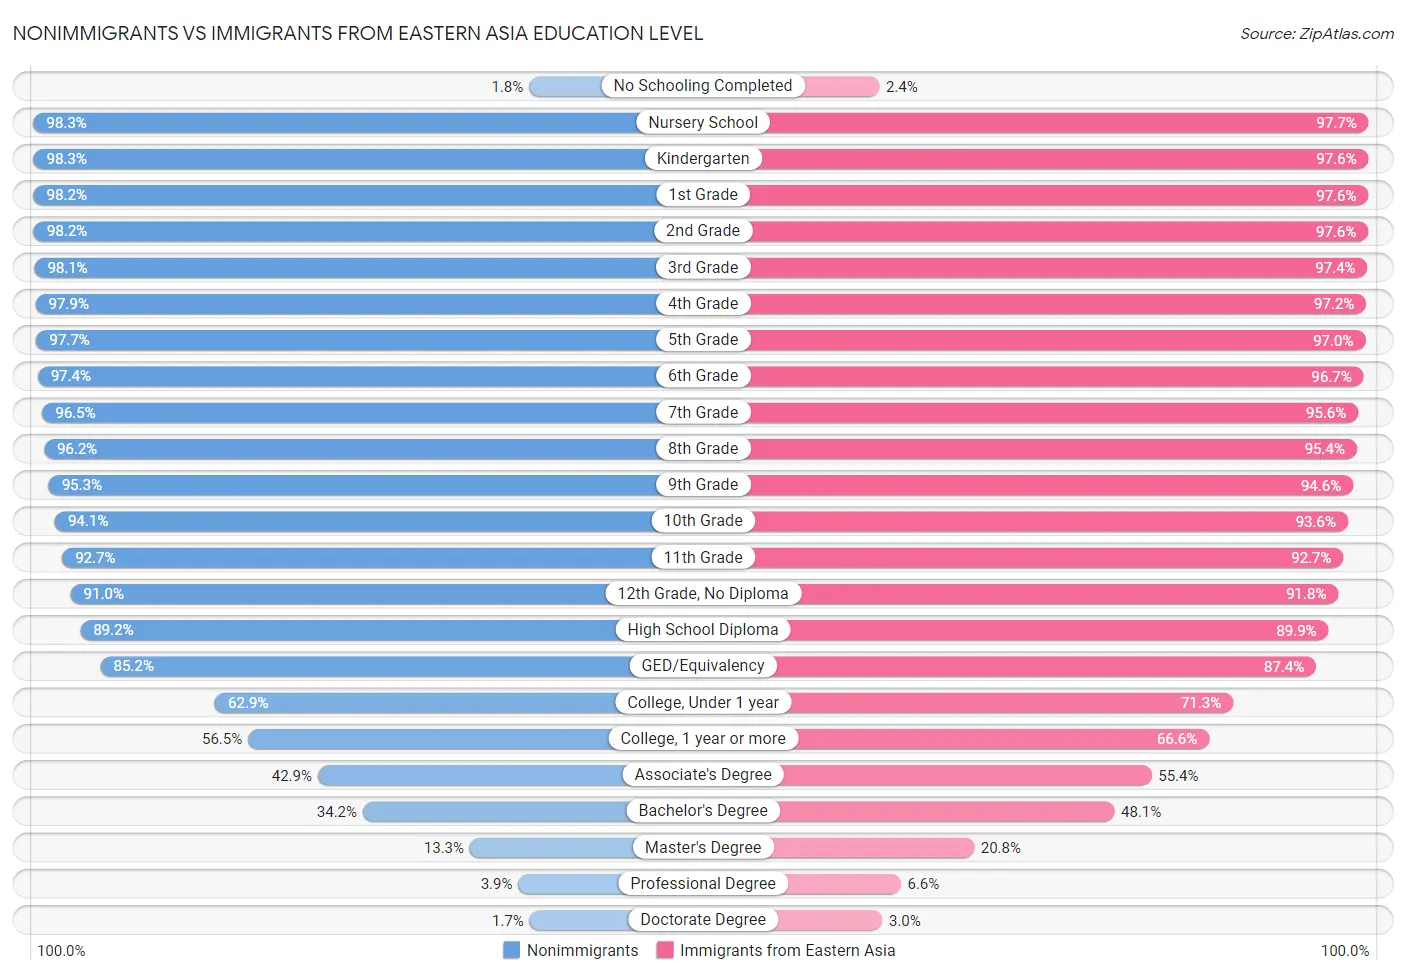 Nonimmigrants vs Immigrants from Eastern Asia Education Level